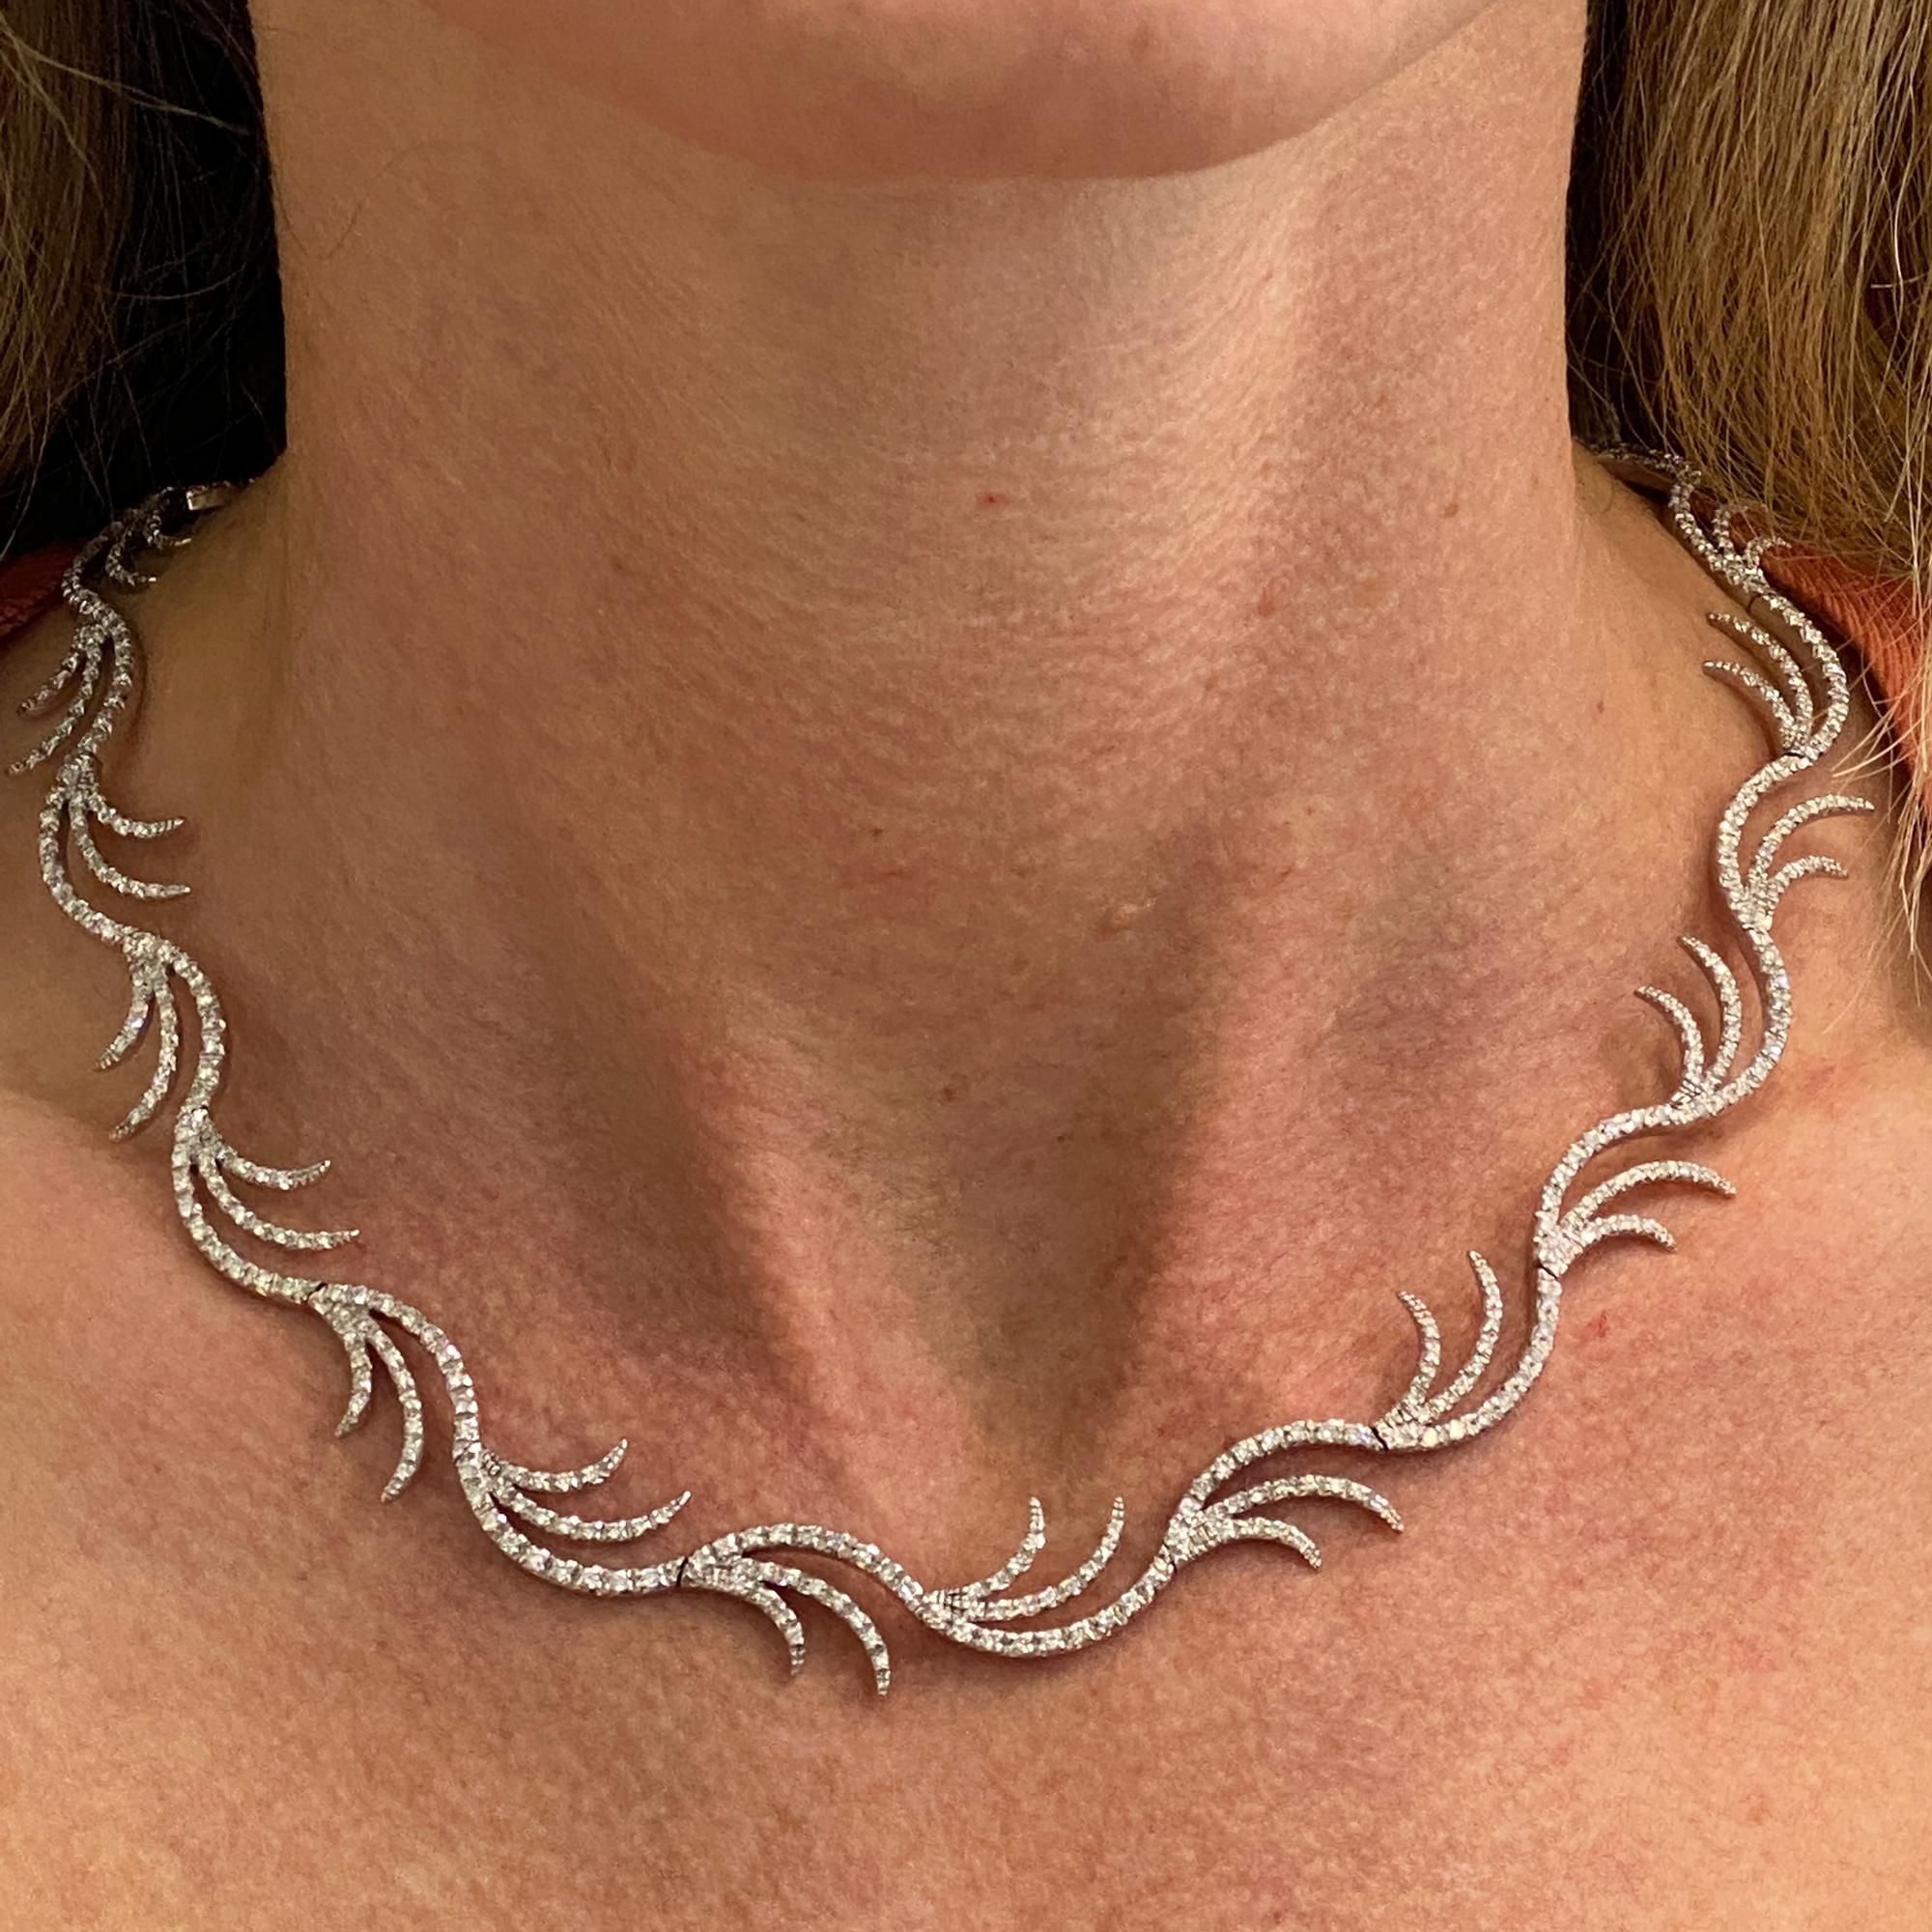 Elegant diamond necklace by Italian designer Favero. The collar necklace features 4.00 CTW of round brilliant cut diamonds set in rounded swirled gold links. The high quality diamonds are graded G-H color and VS clarity. The necklace measures 15.5